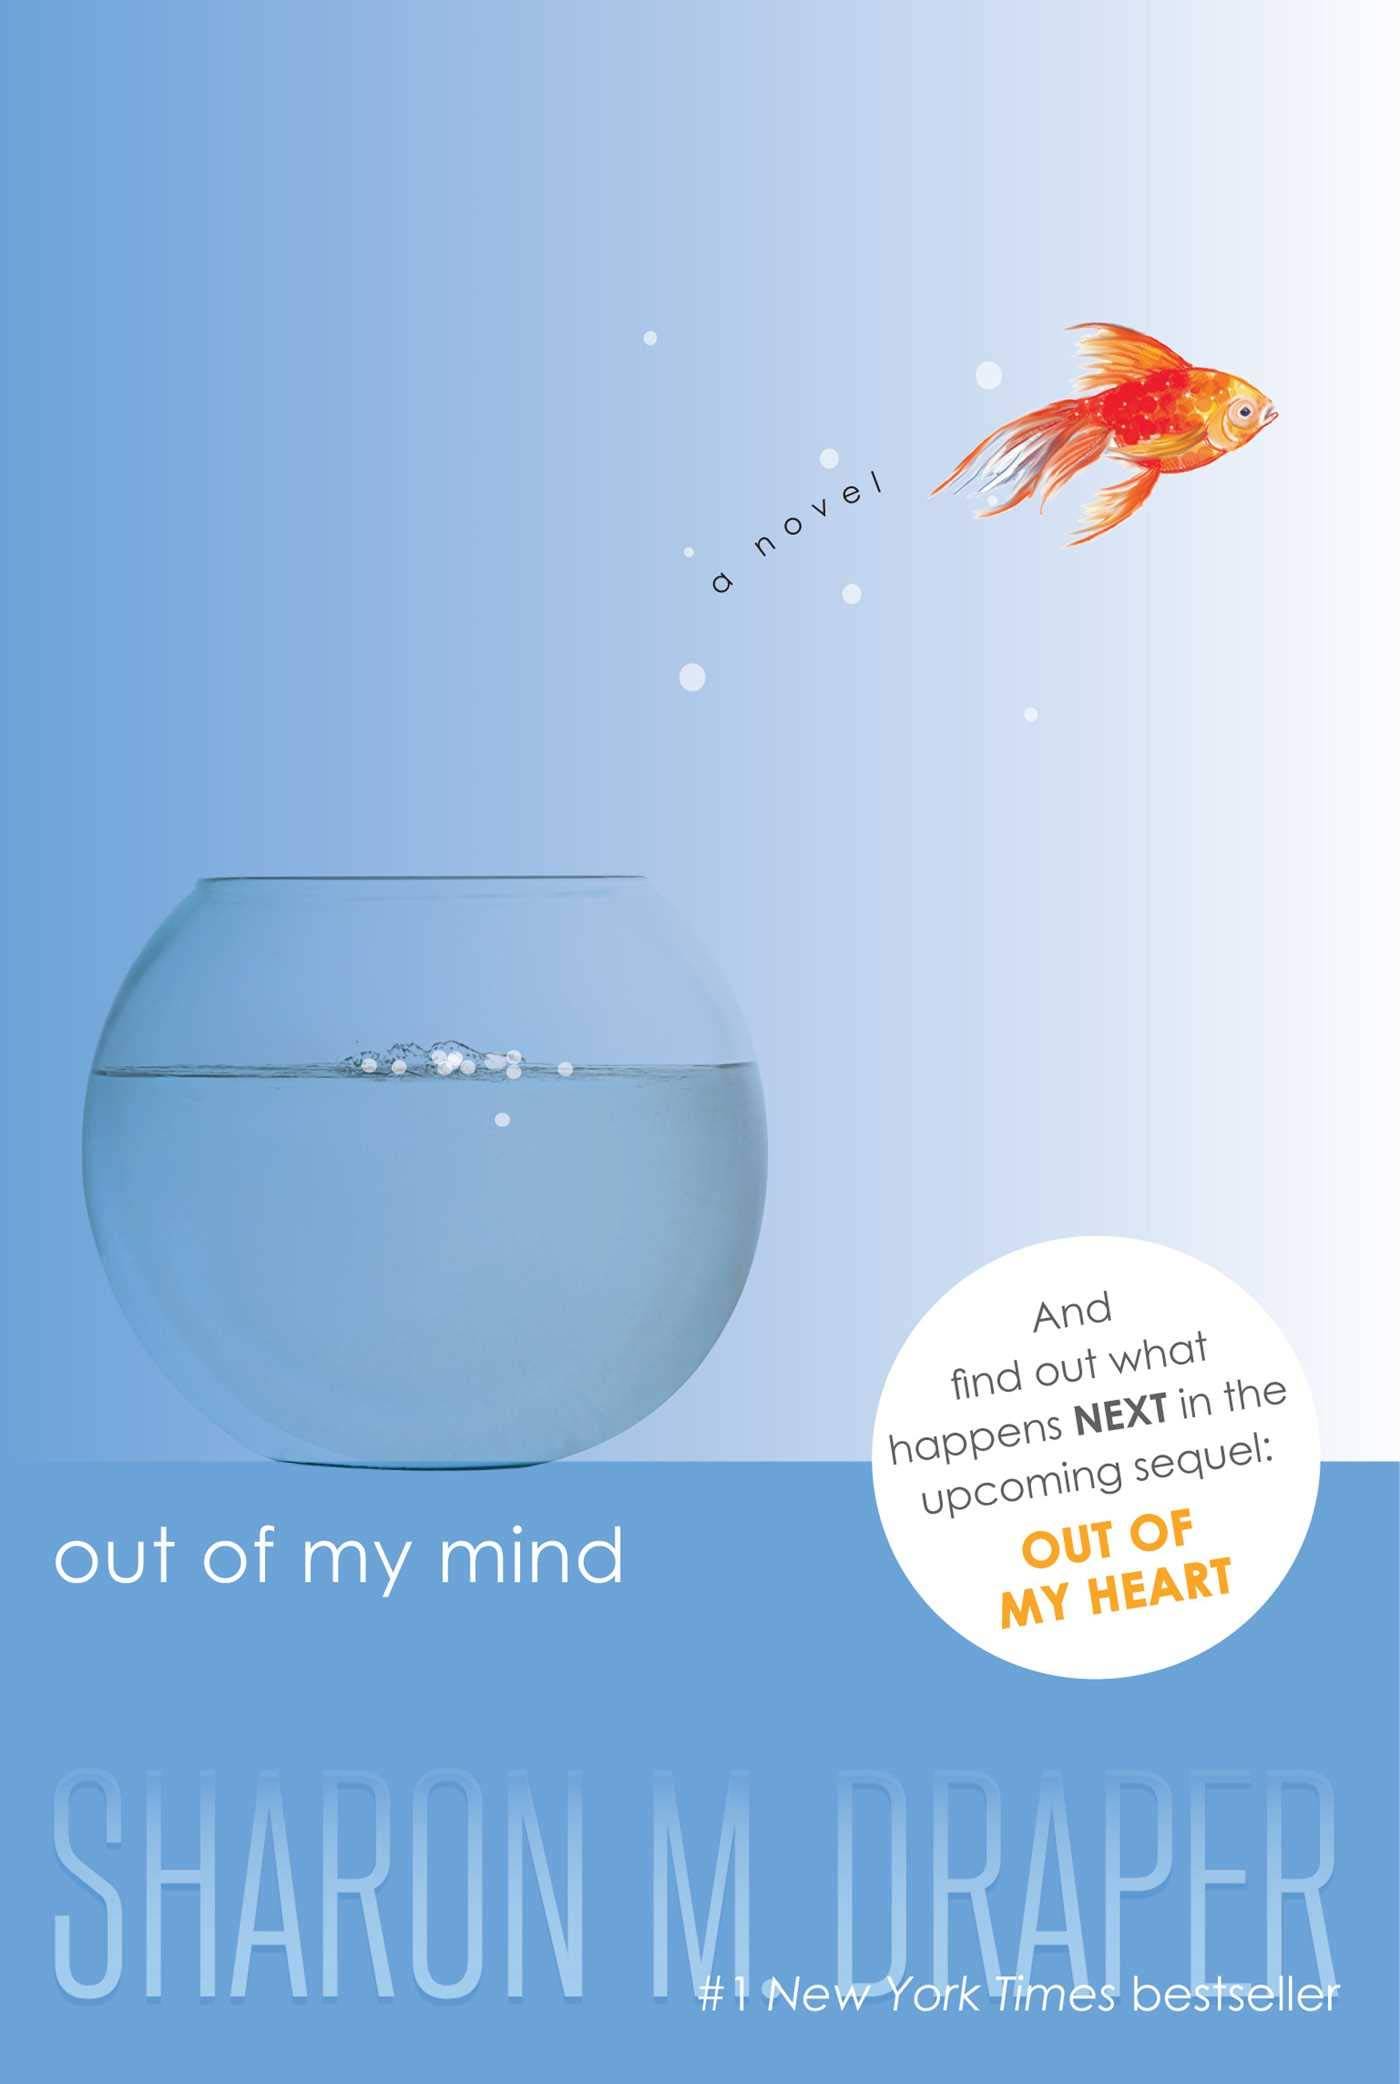 IMG : Out of my mind